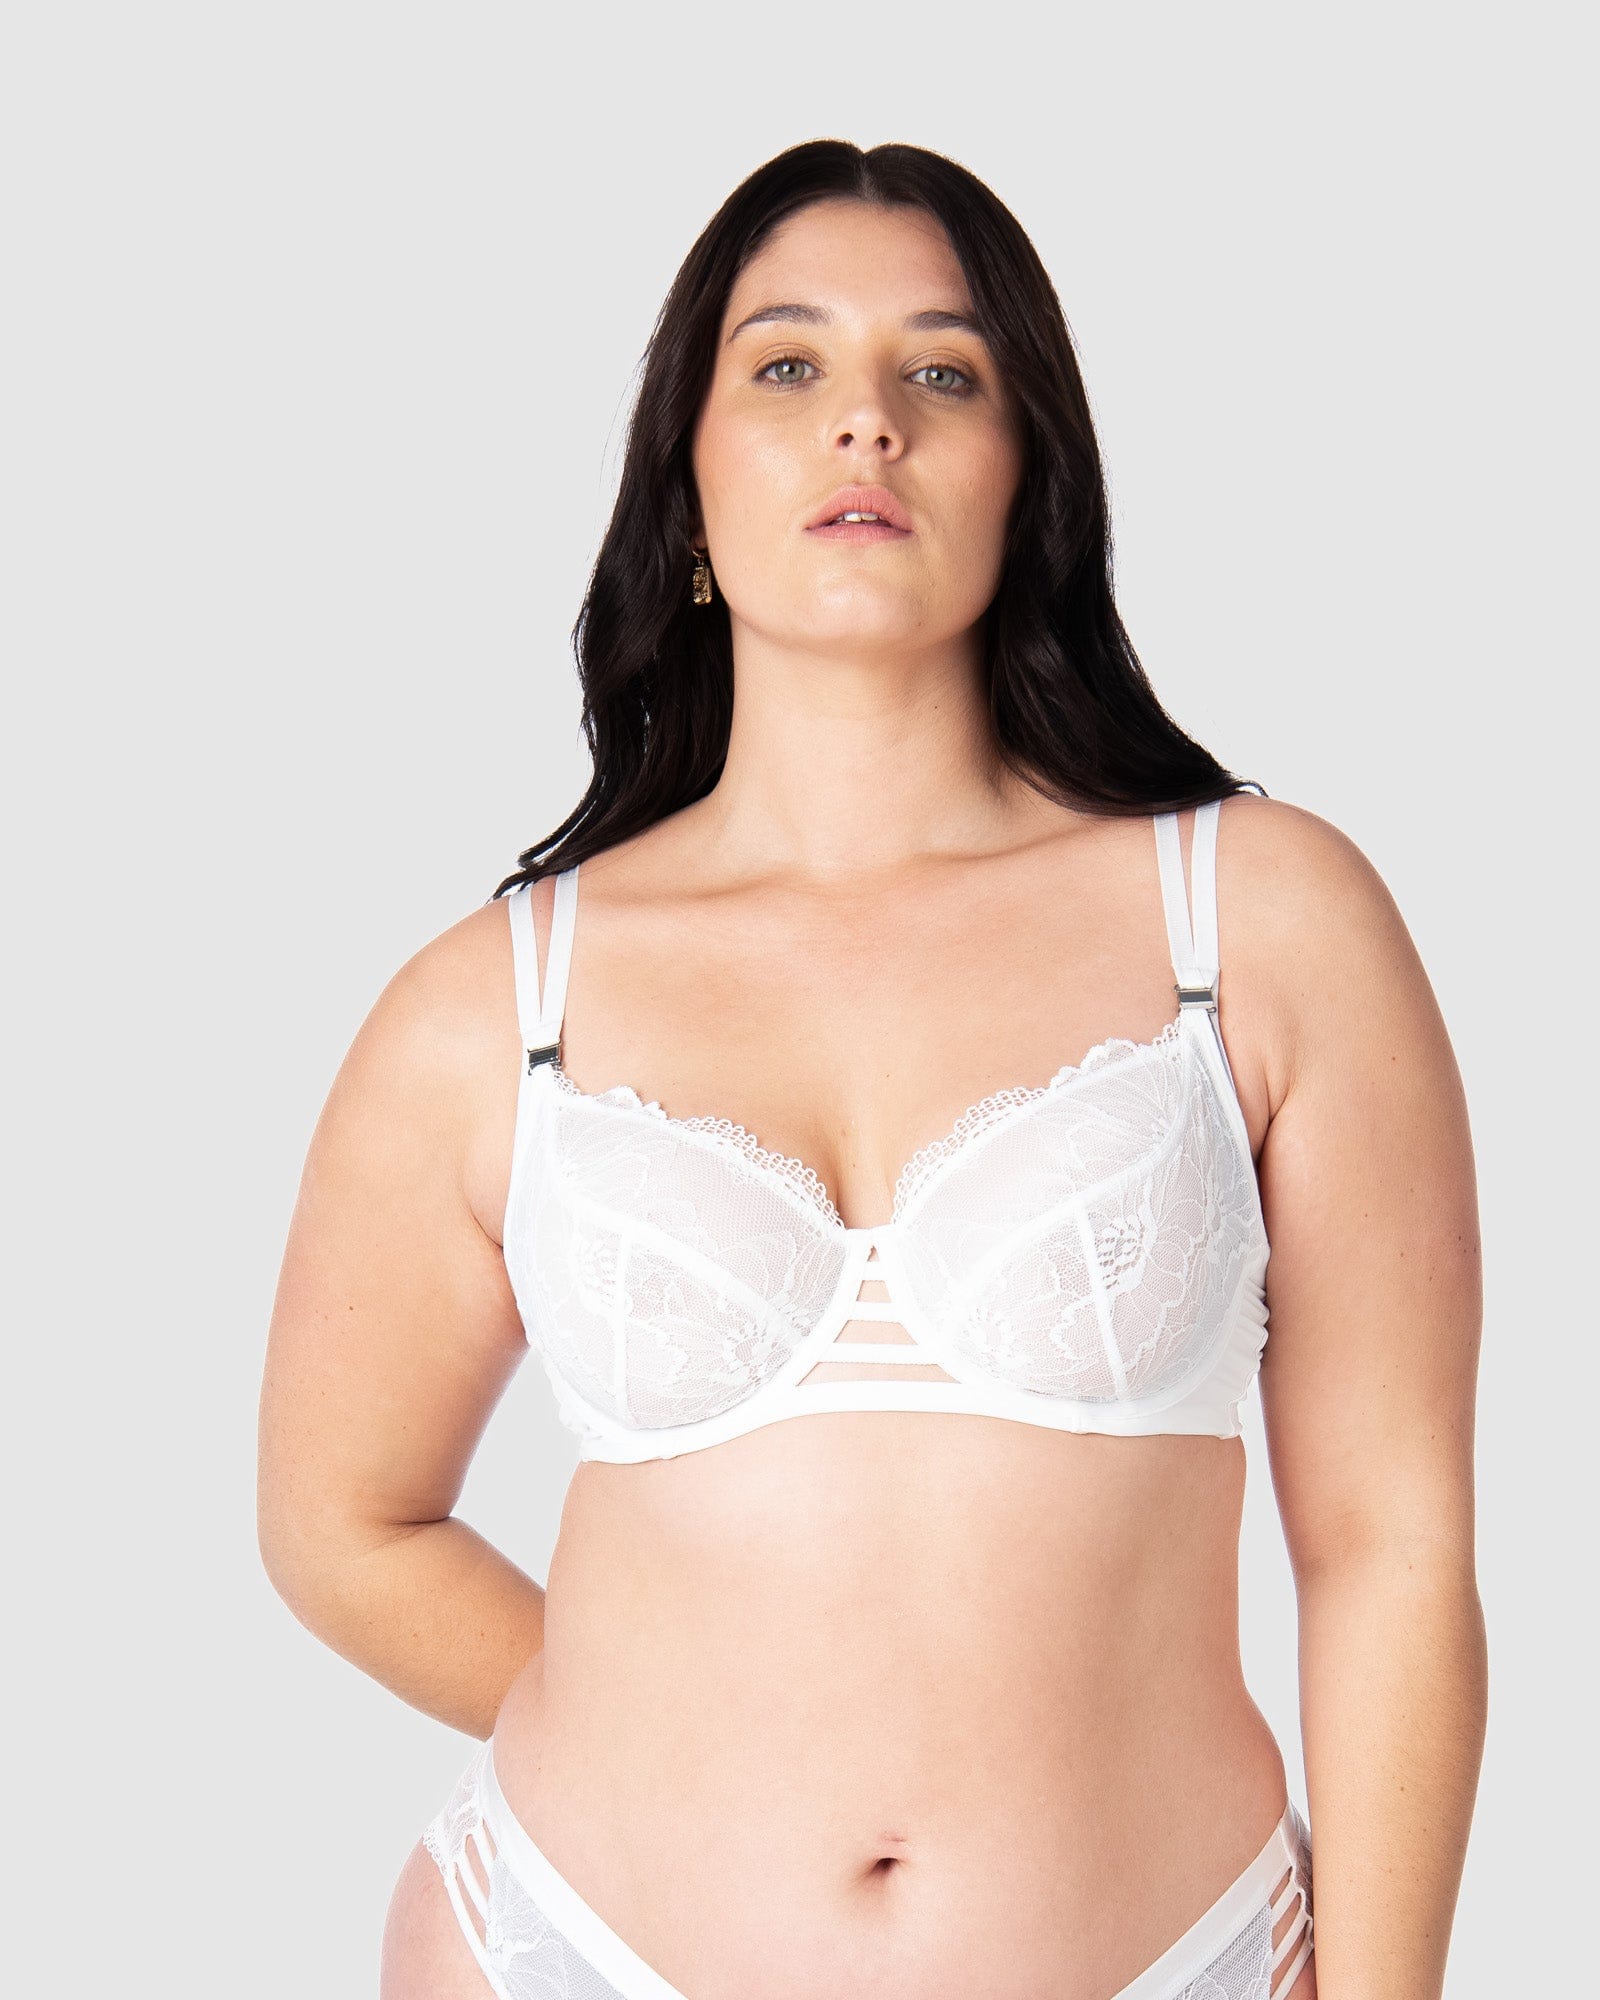 Sexy White Bra, Shop The Largest Collection